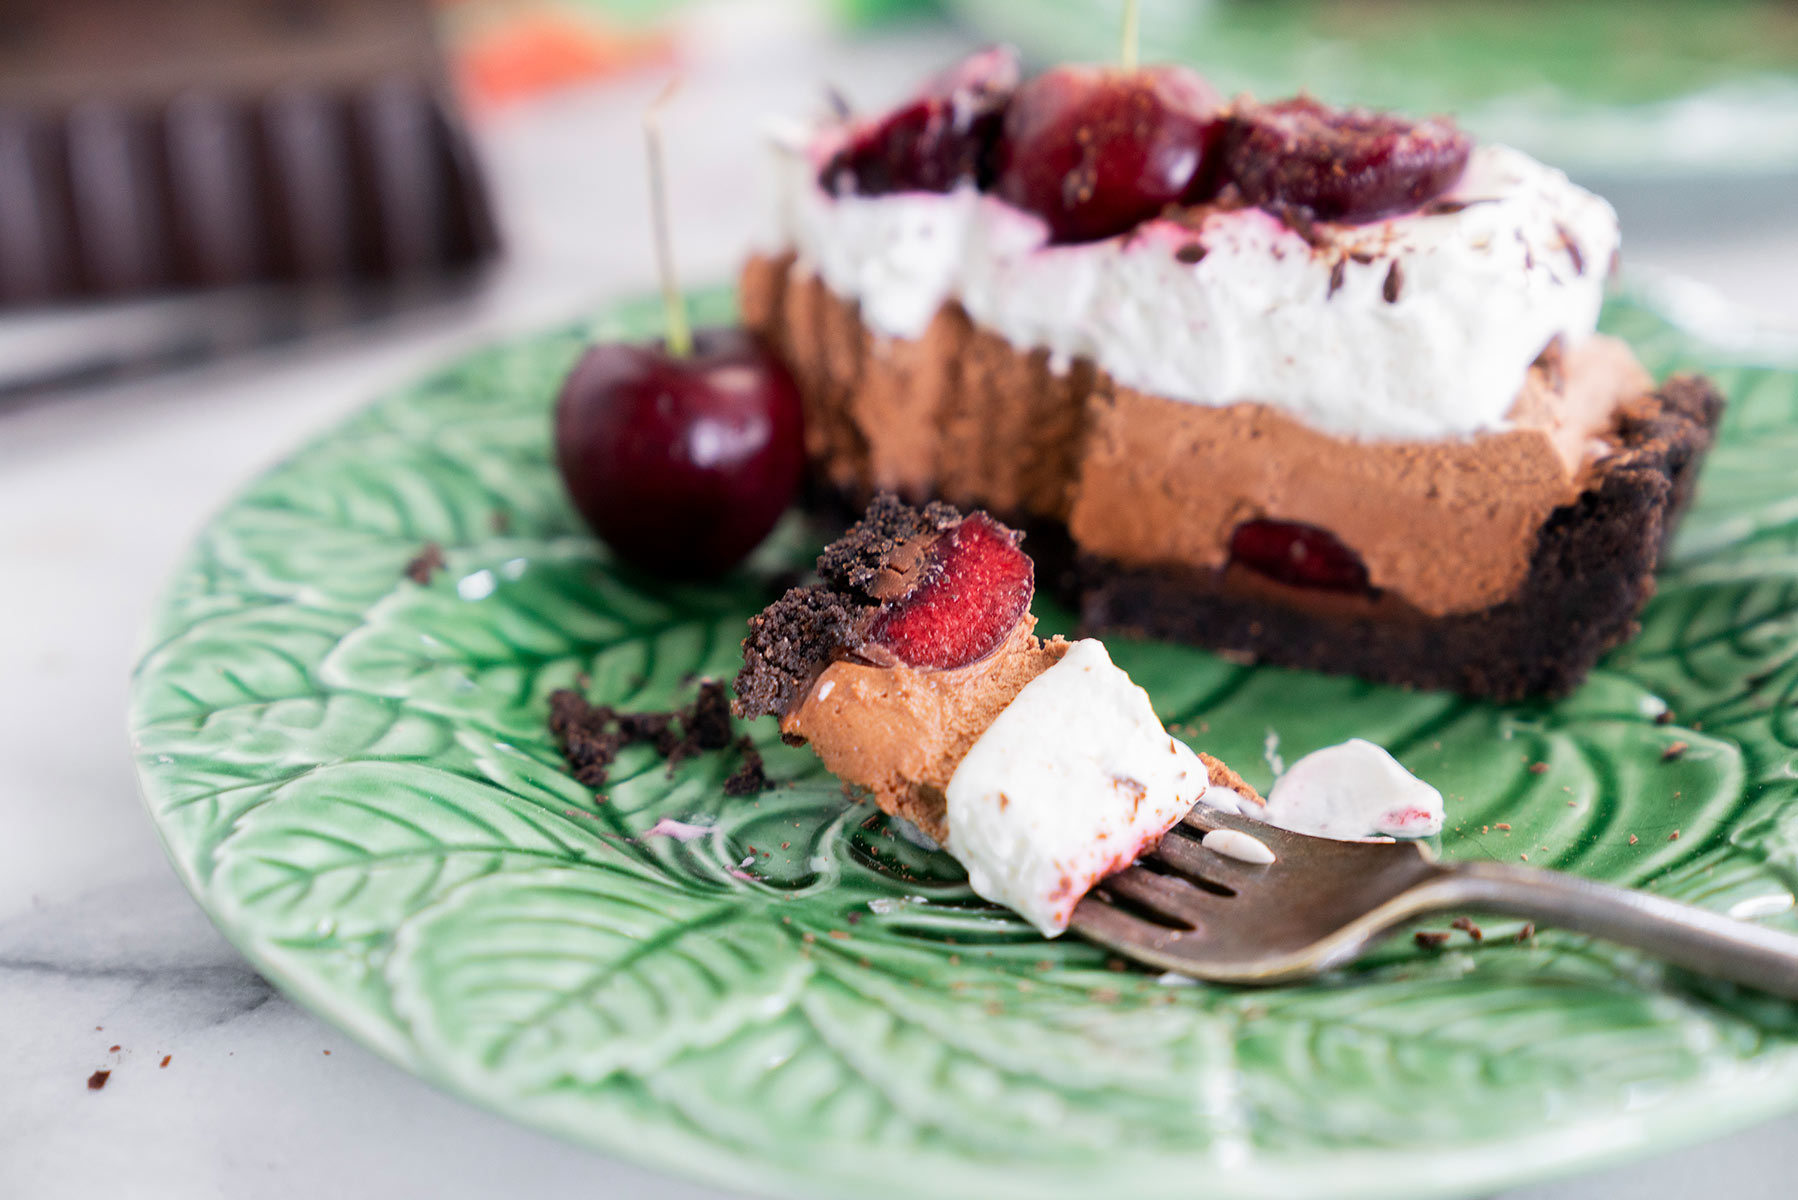 slice of black forest tart with fresh cherries and whipped cream with a bite taken out on a green plate